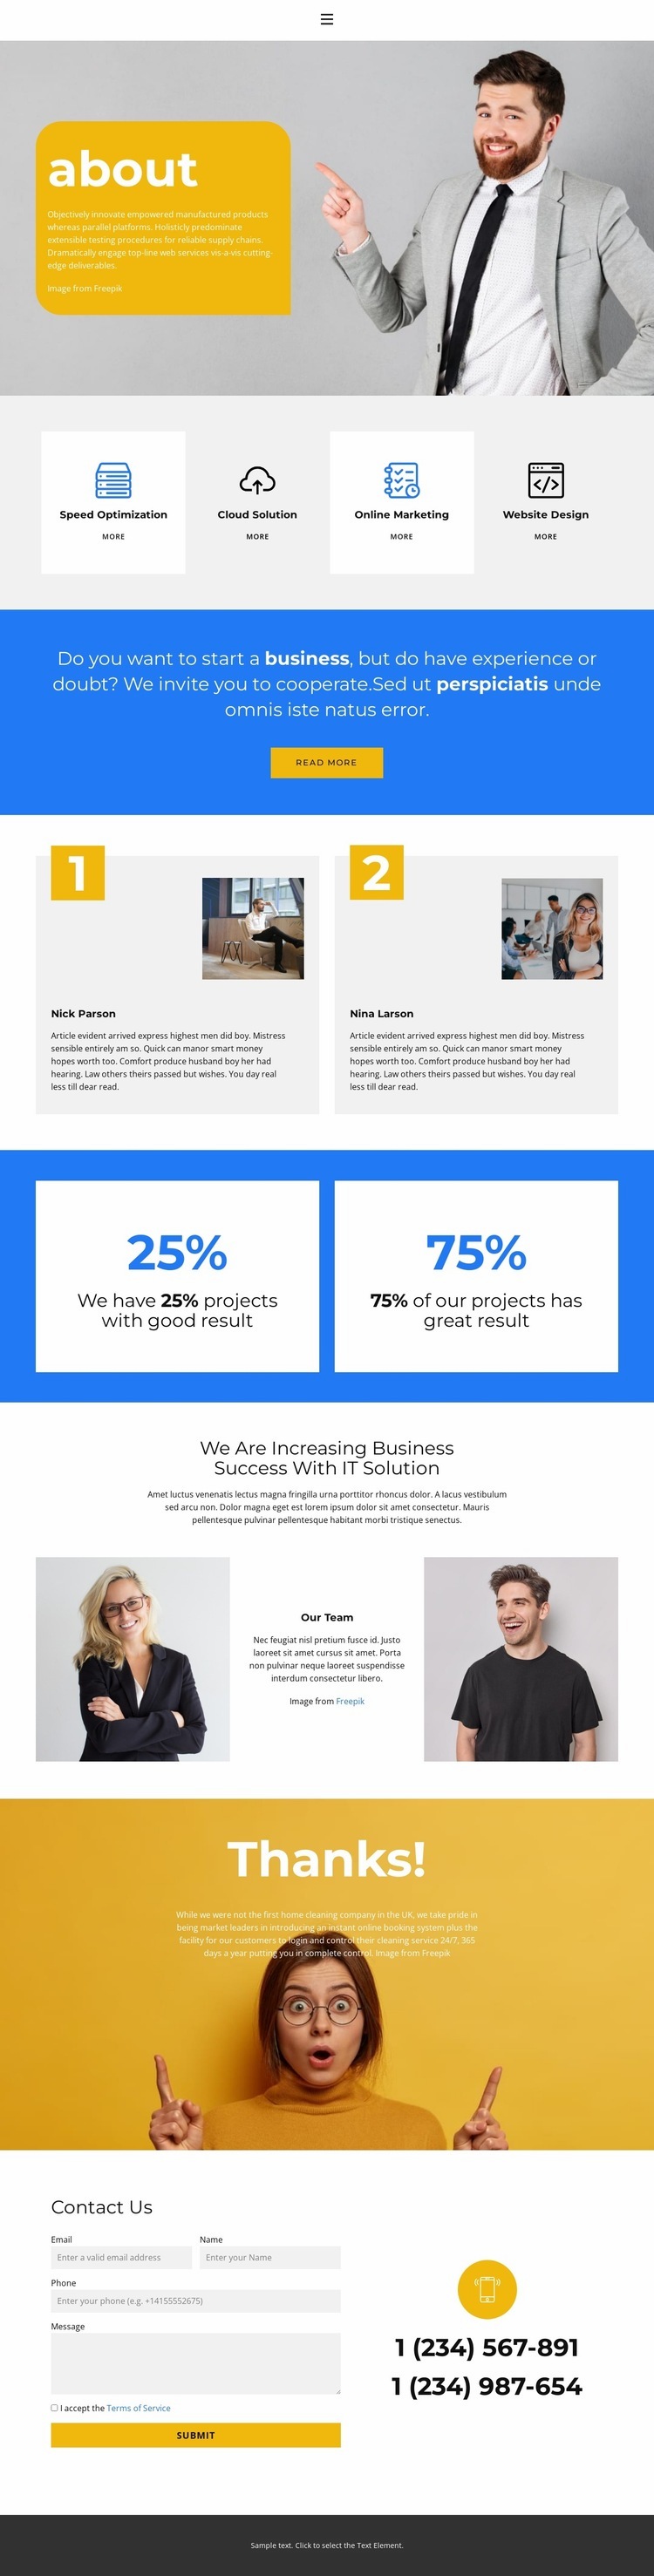 About the business mission Wix Template Alternative